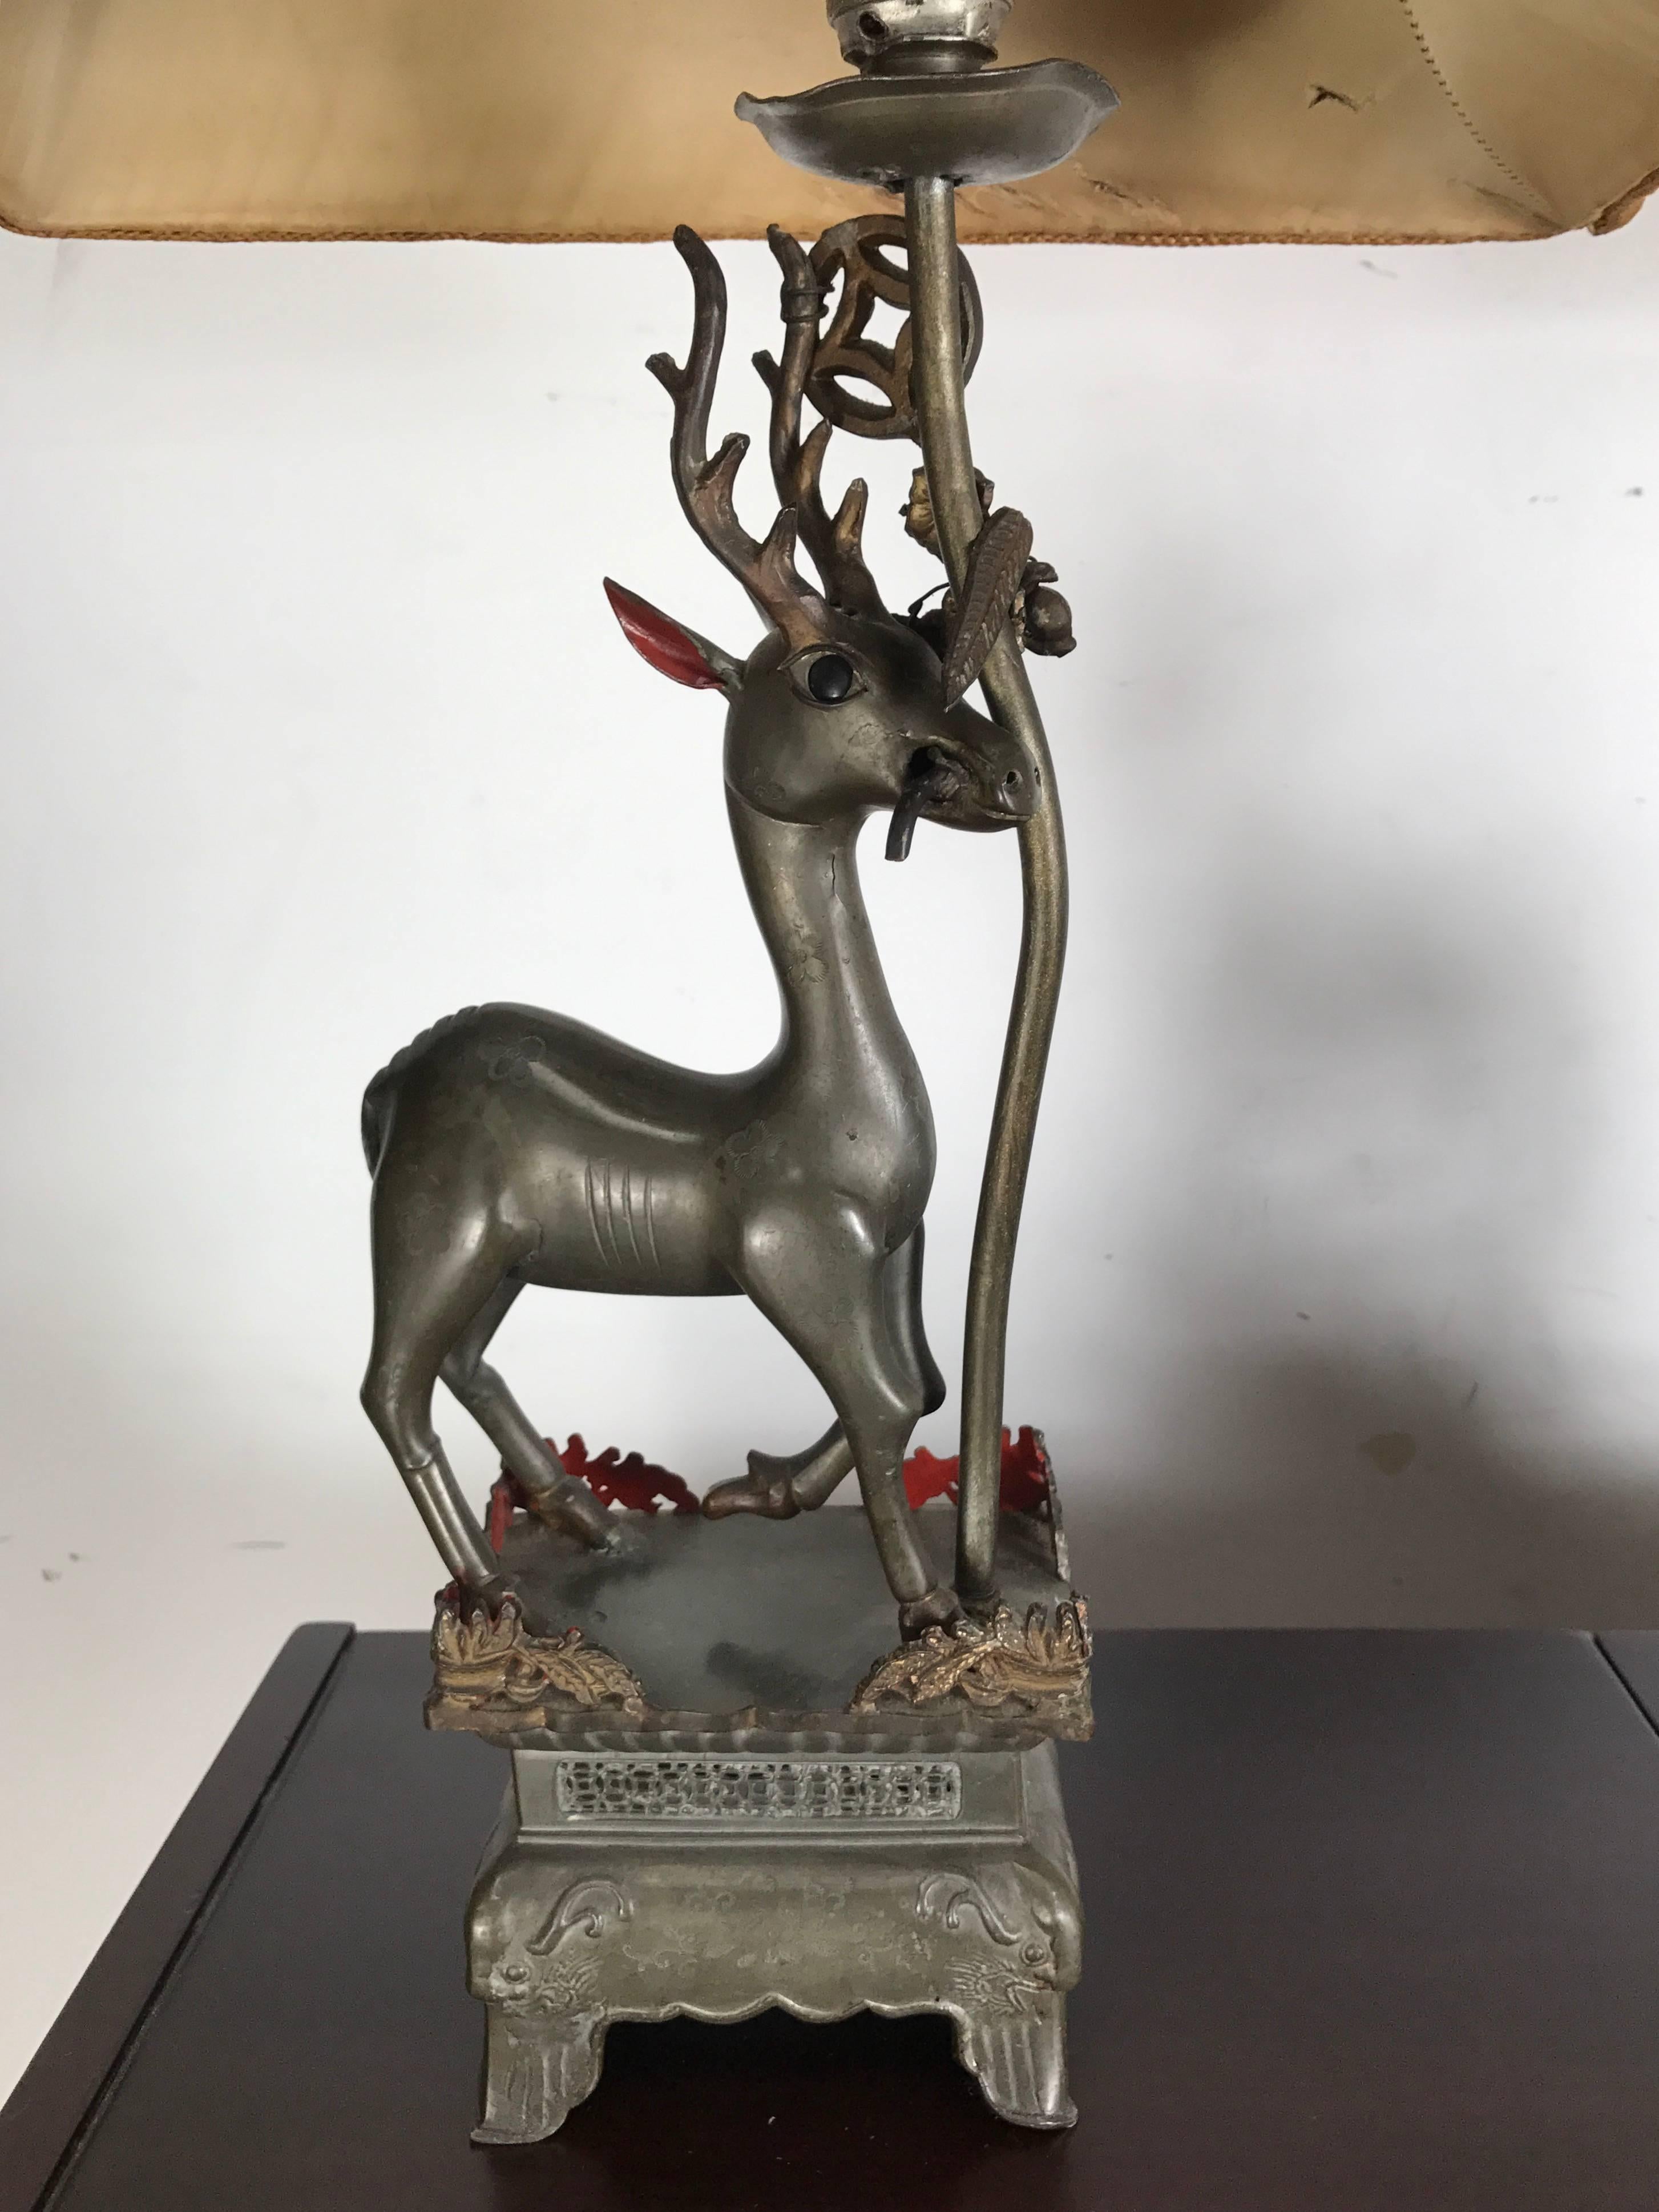 Charming pair of Antique Chinese Pewter Gazelle themed table lamps, Original antique oil lamp converted to electric in the early 20th century, Wonderful bronze color and patina. Hand chased, etched, decorated and painted, Amazing detailing, Retains